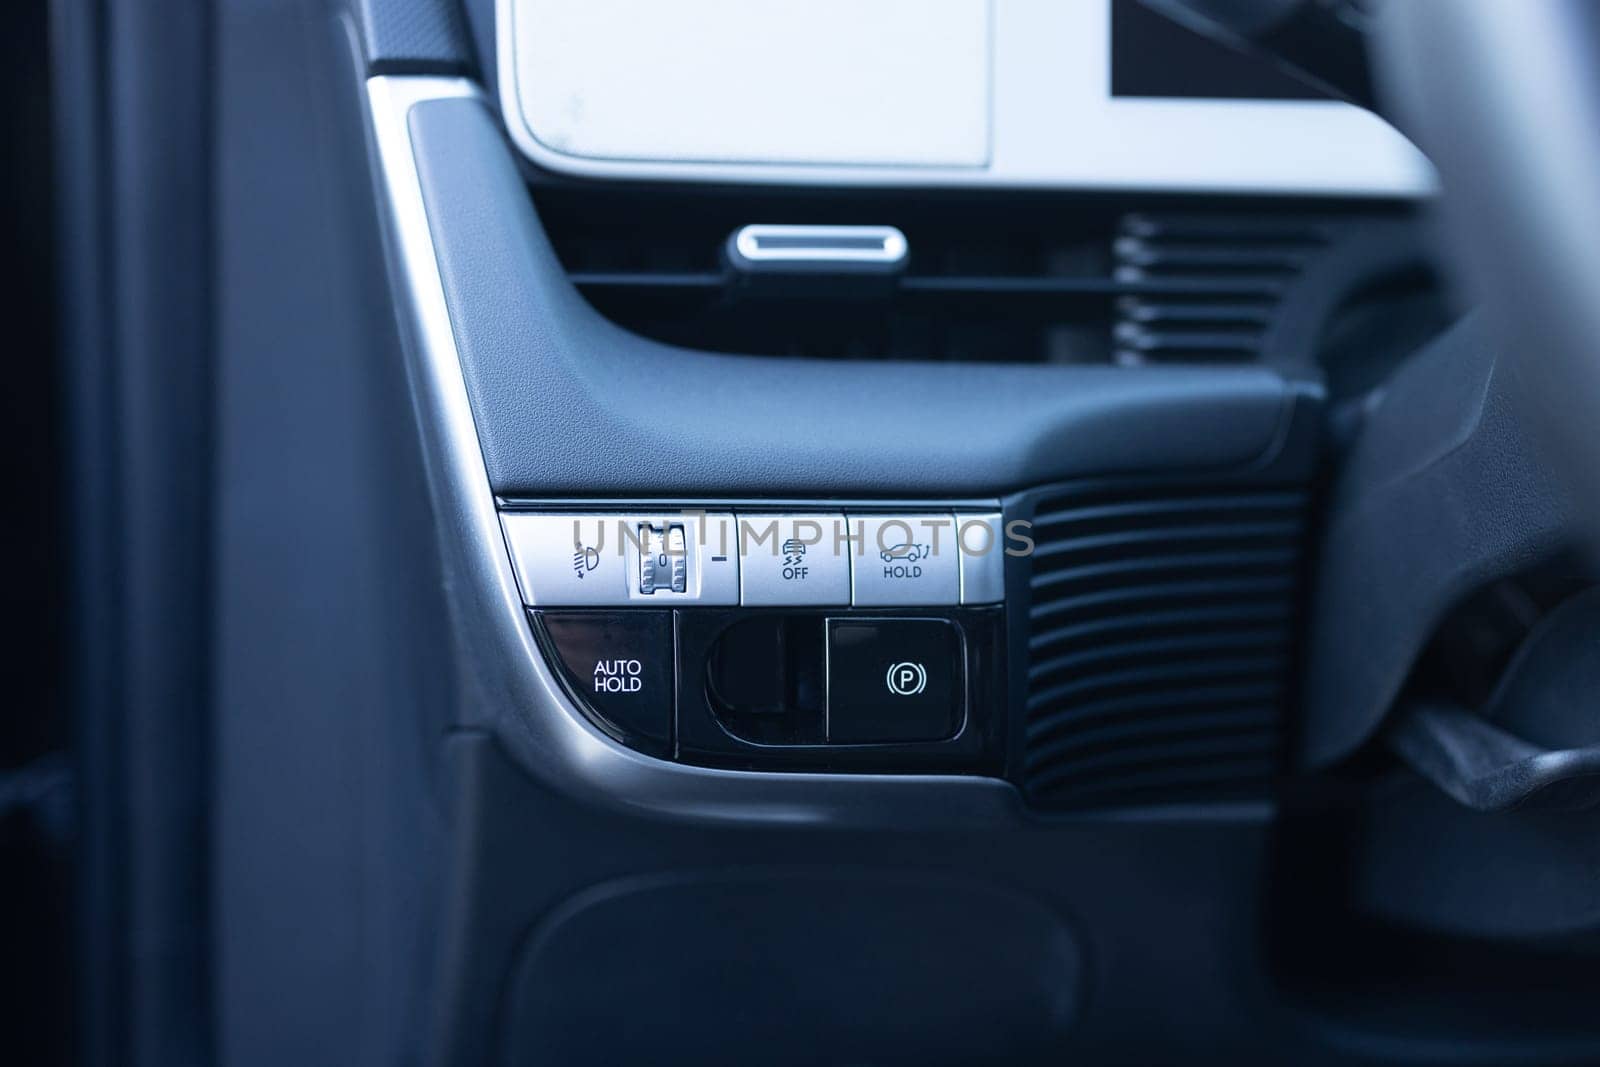 Auto hold button in a modern vehicle. ESP electronic stability program control. Interior detail of a modern electric car. ESP button. Car light switch. Dimming light button.